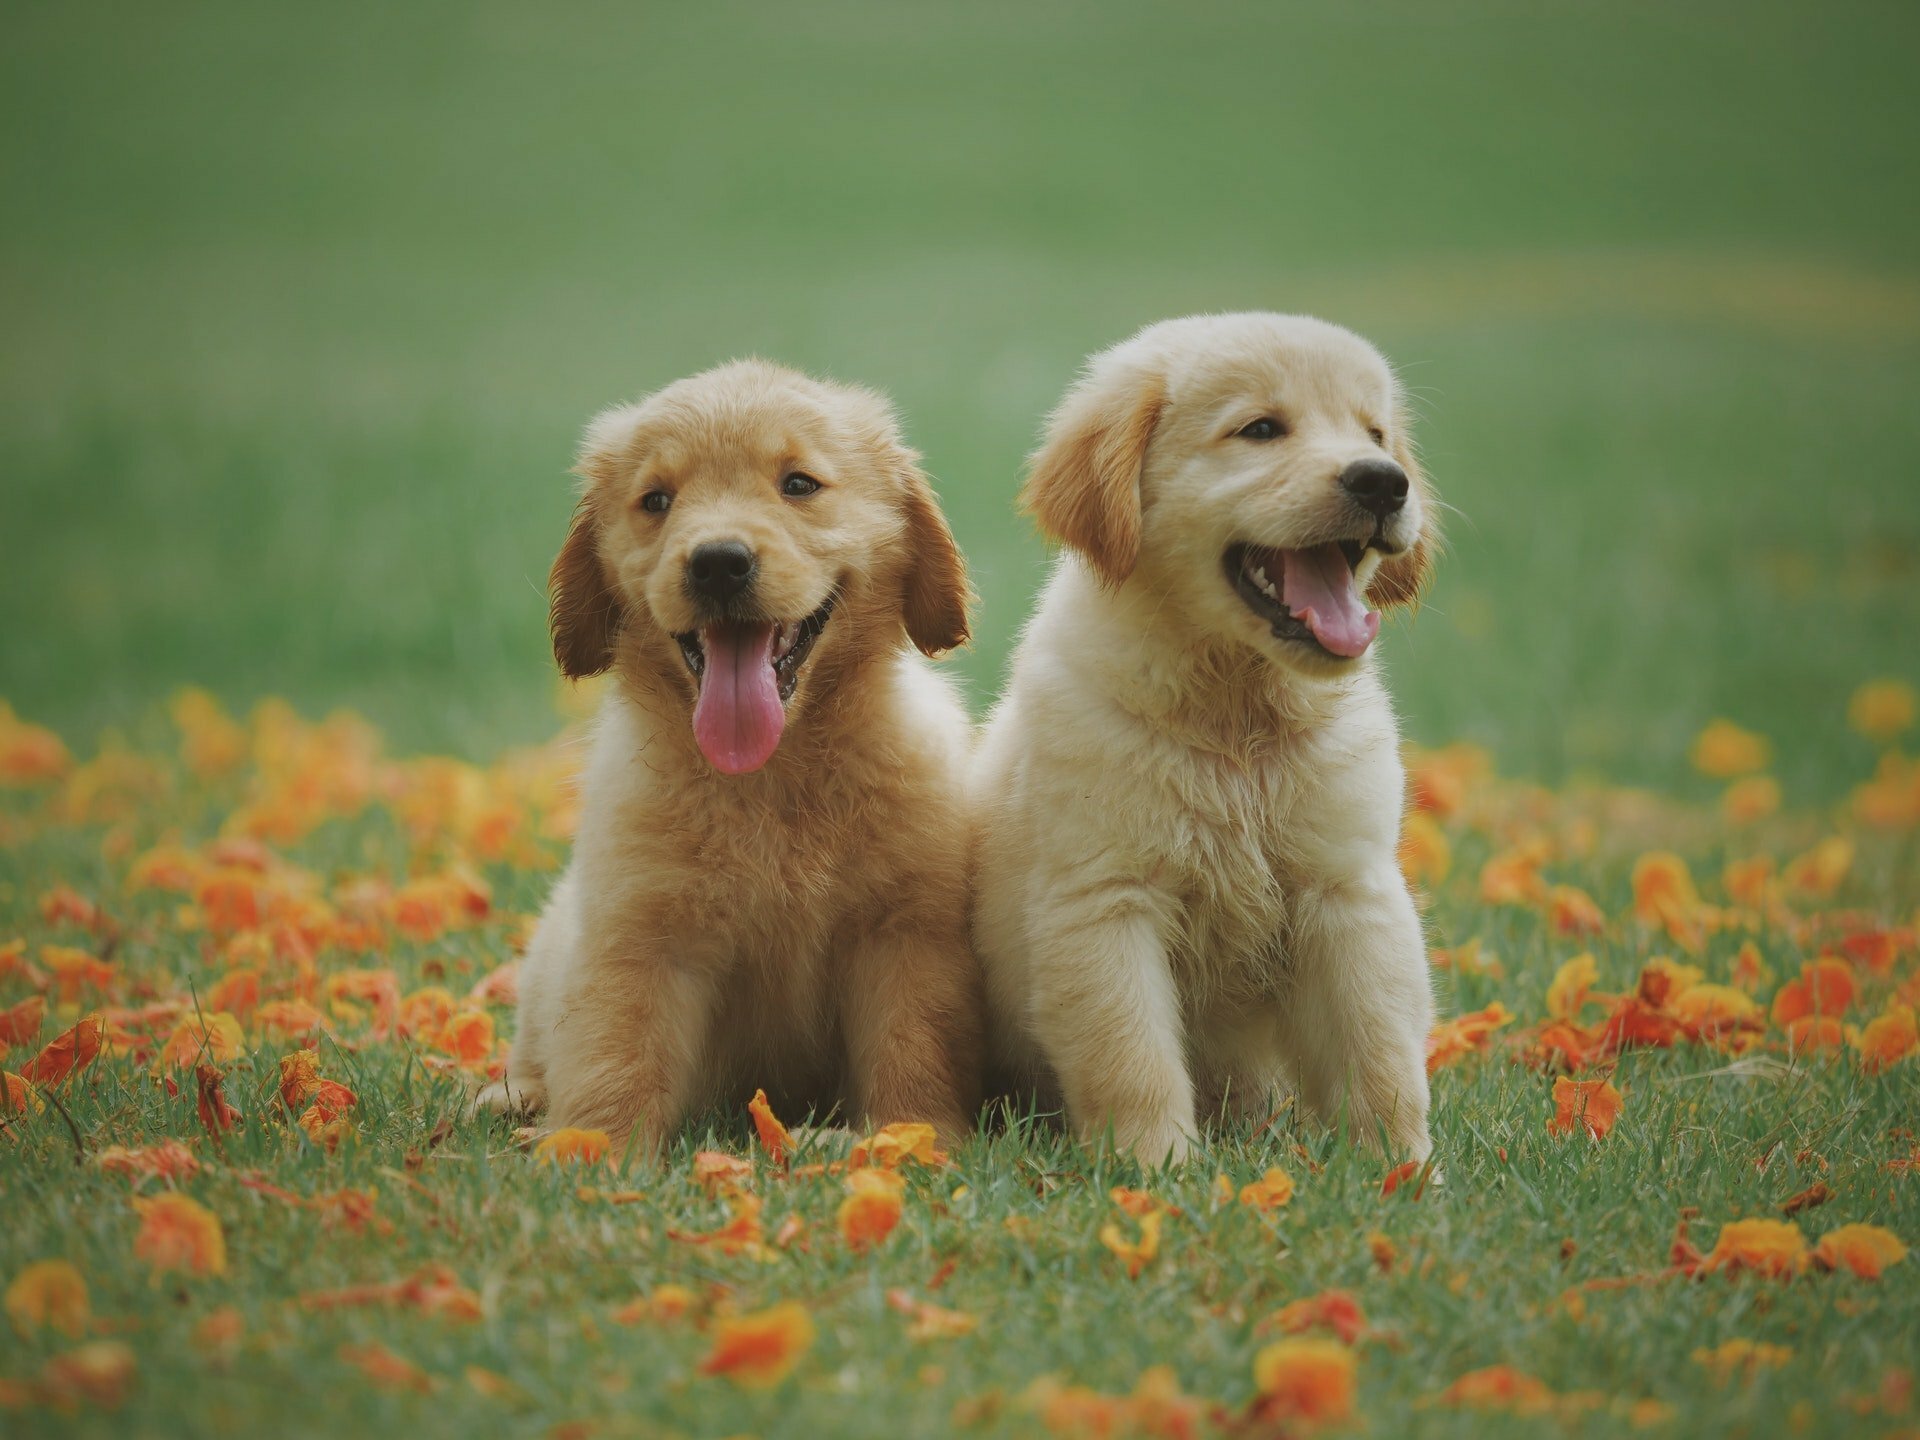 two cute puppies on grass